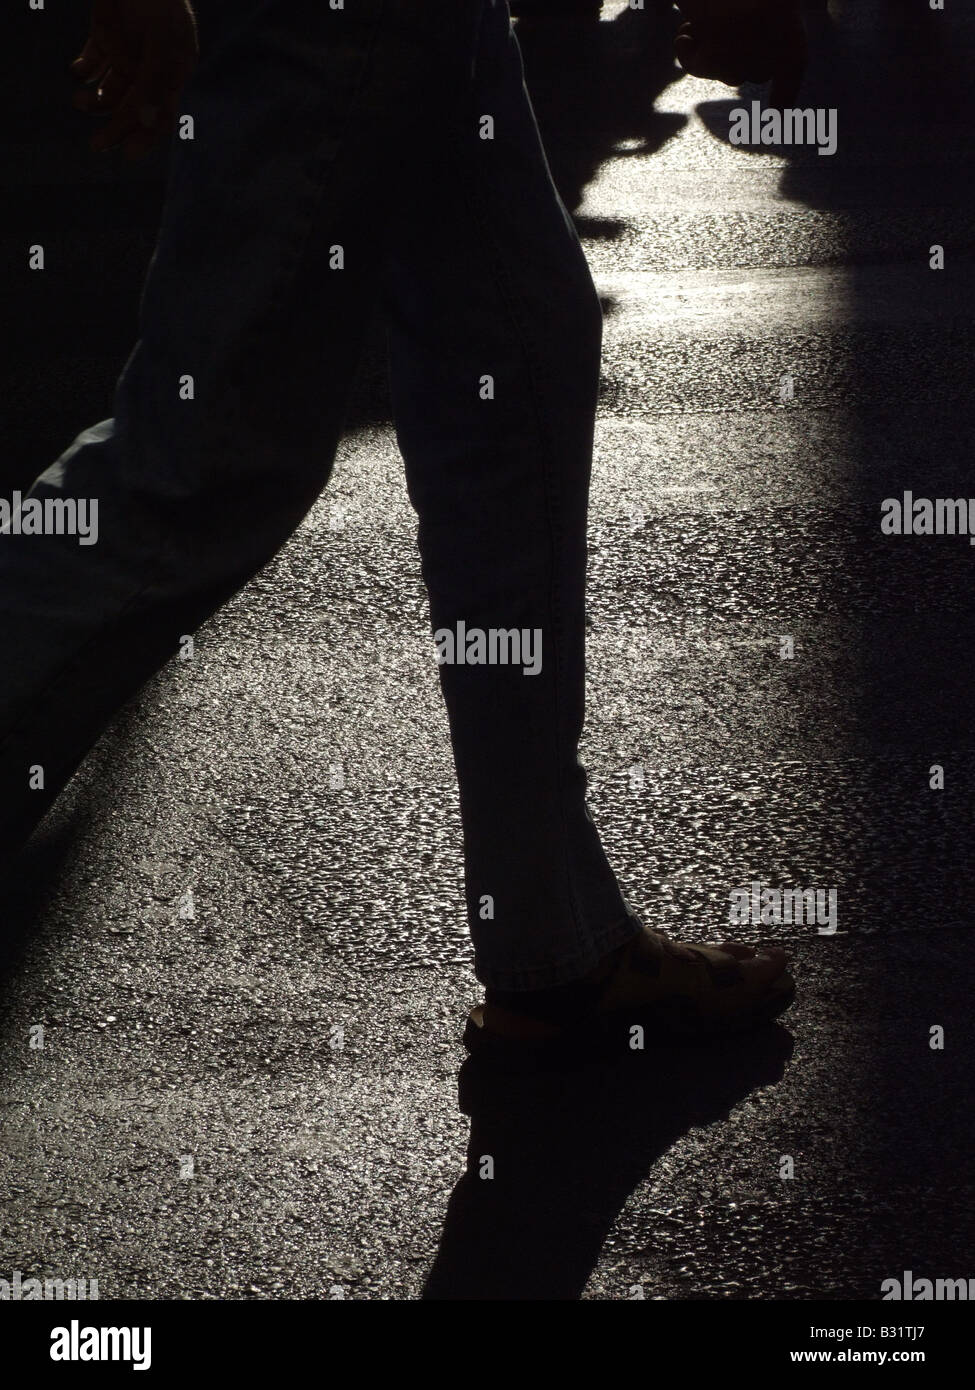 person's dark shadow on road surface in town Stock Photo